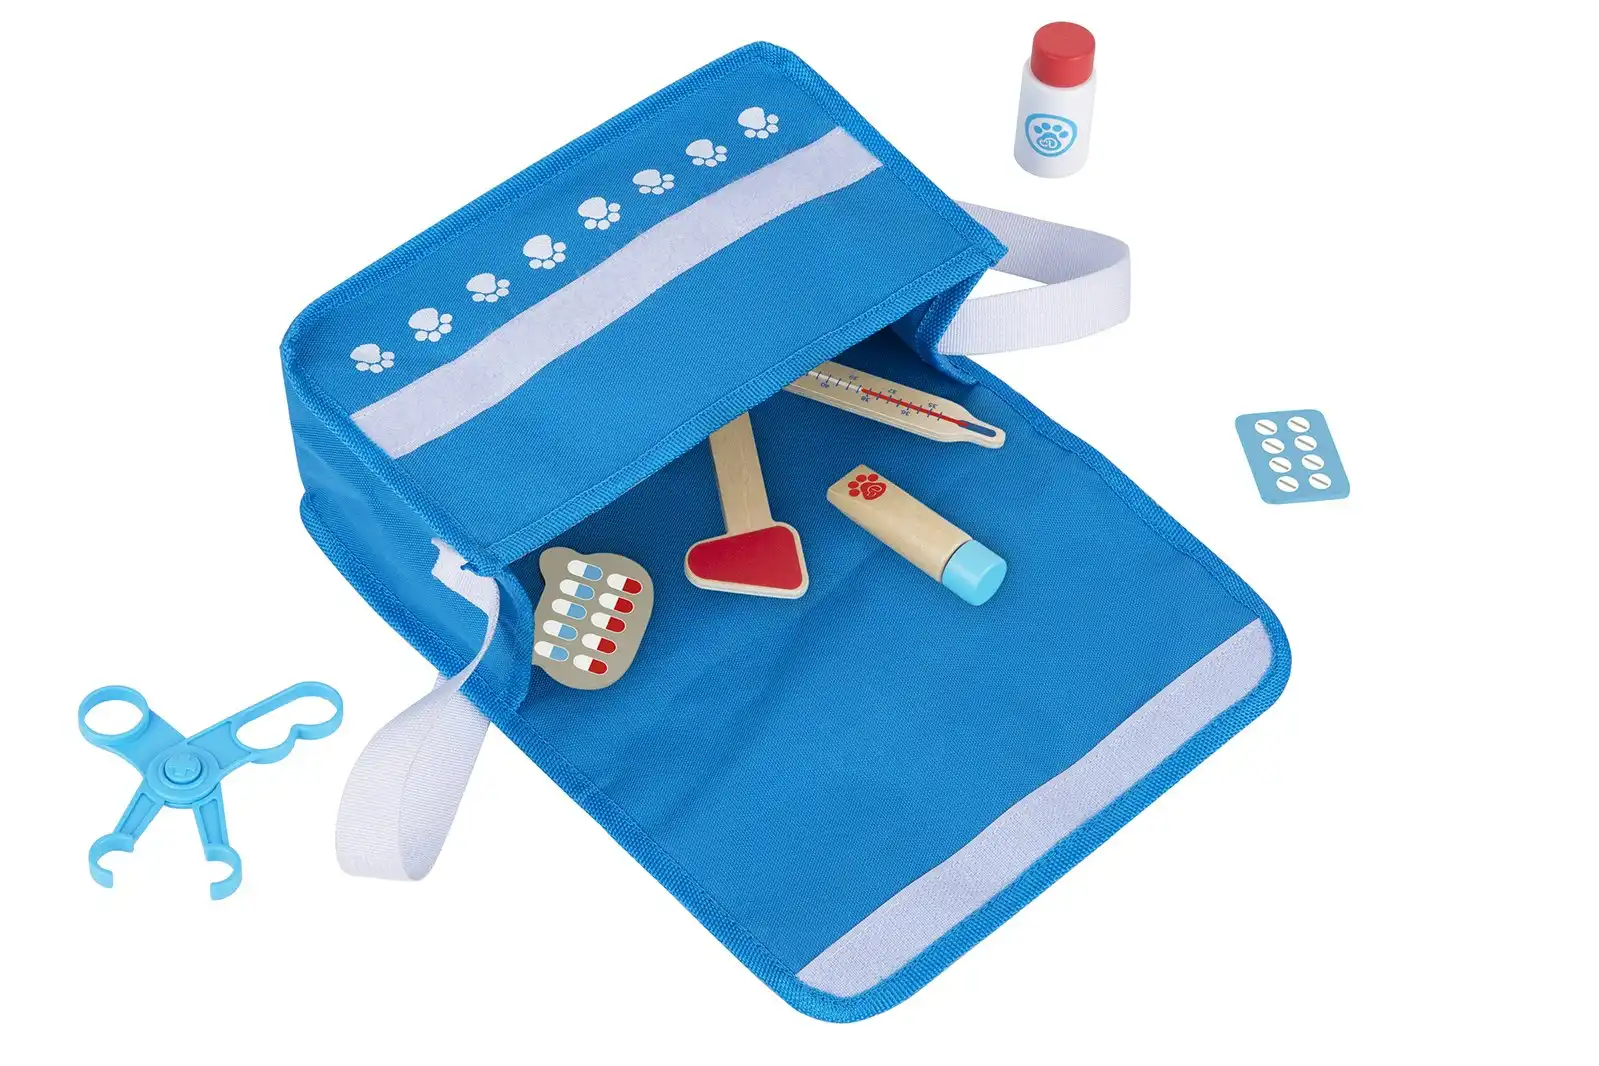 Tooky Toy Little Pet Vet Set Pretend Play Medical Themed Carry Bag For Kids 3y+